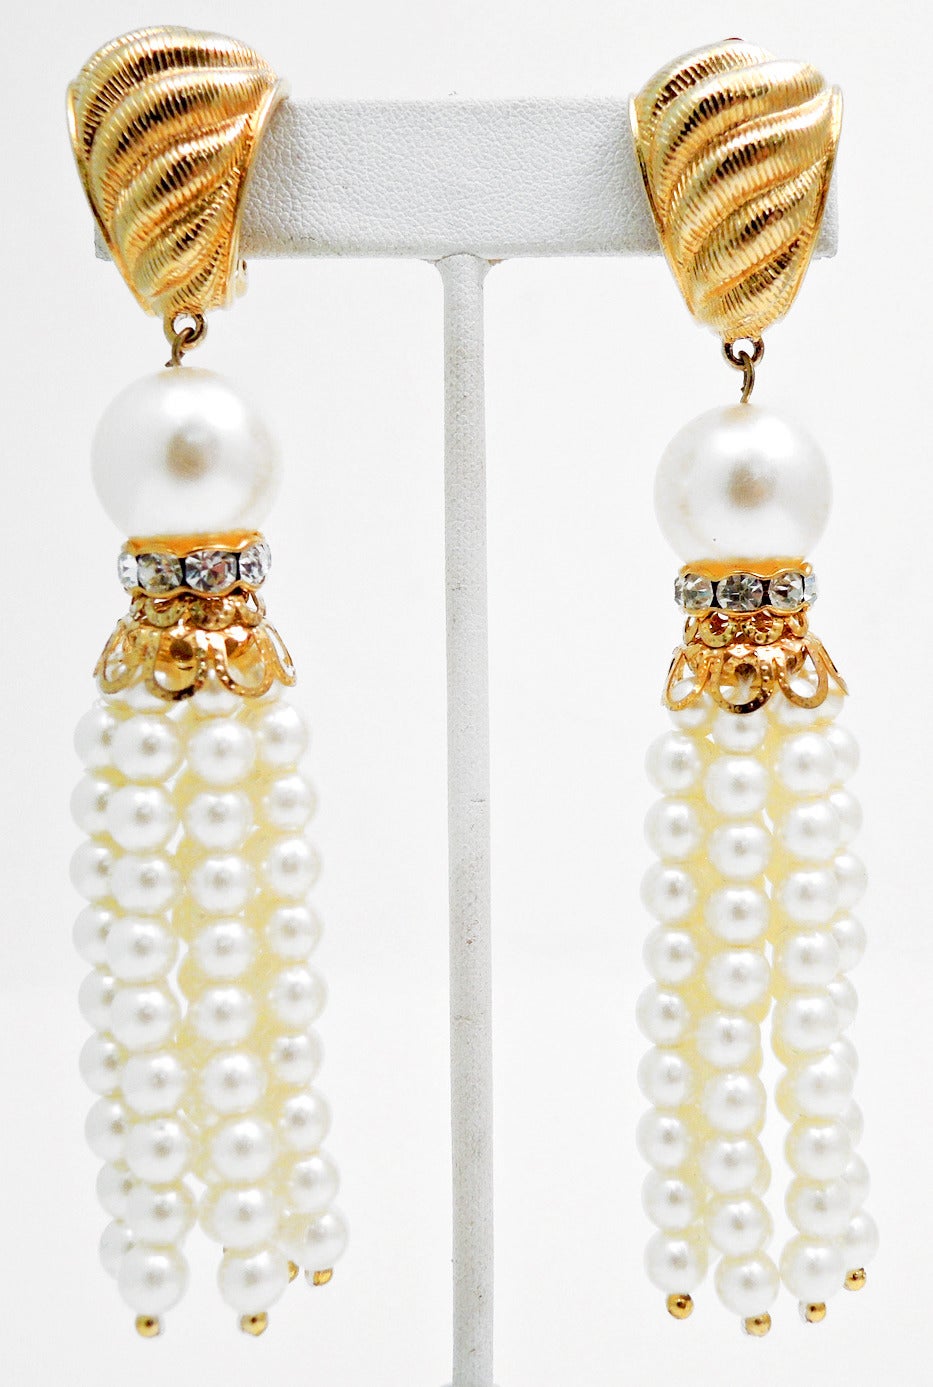 Vintage Givenchy prices have almost doubled since the New Year and I have been having a tough time finding splendid pieces.  These vintage signed Givenchy earrings feature faux pearls with clear rhinestone accents in a gold-tone setting.  These clip